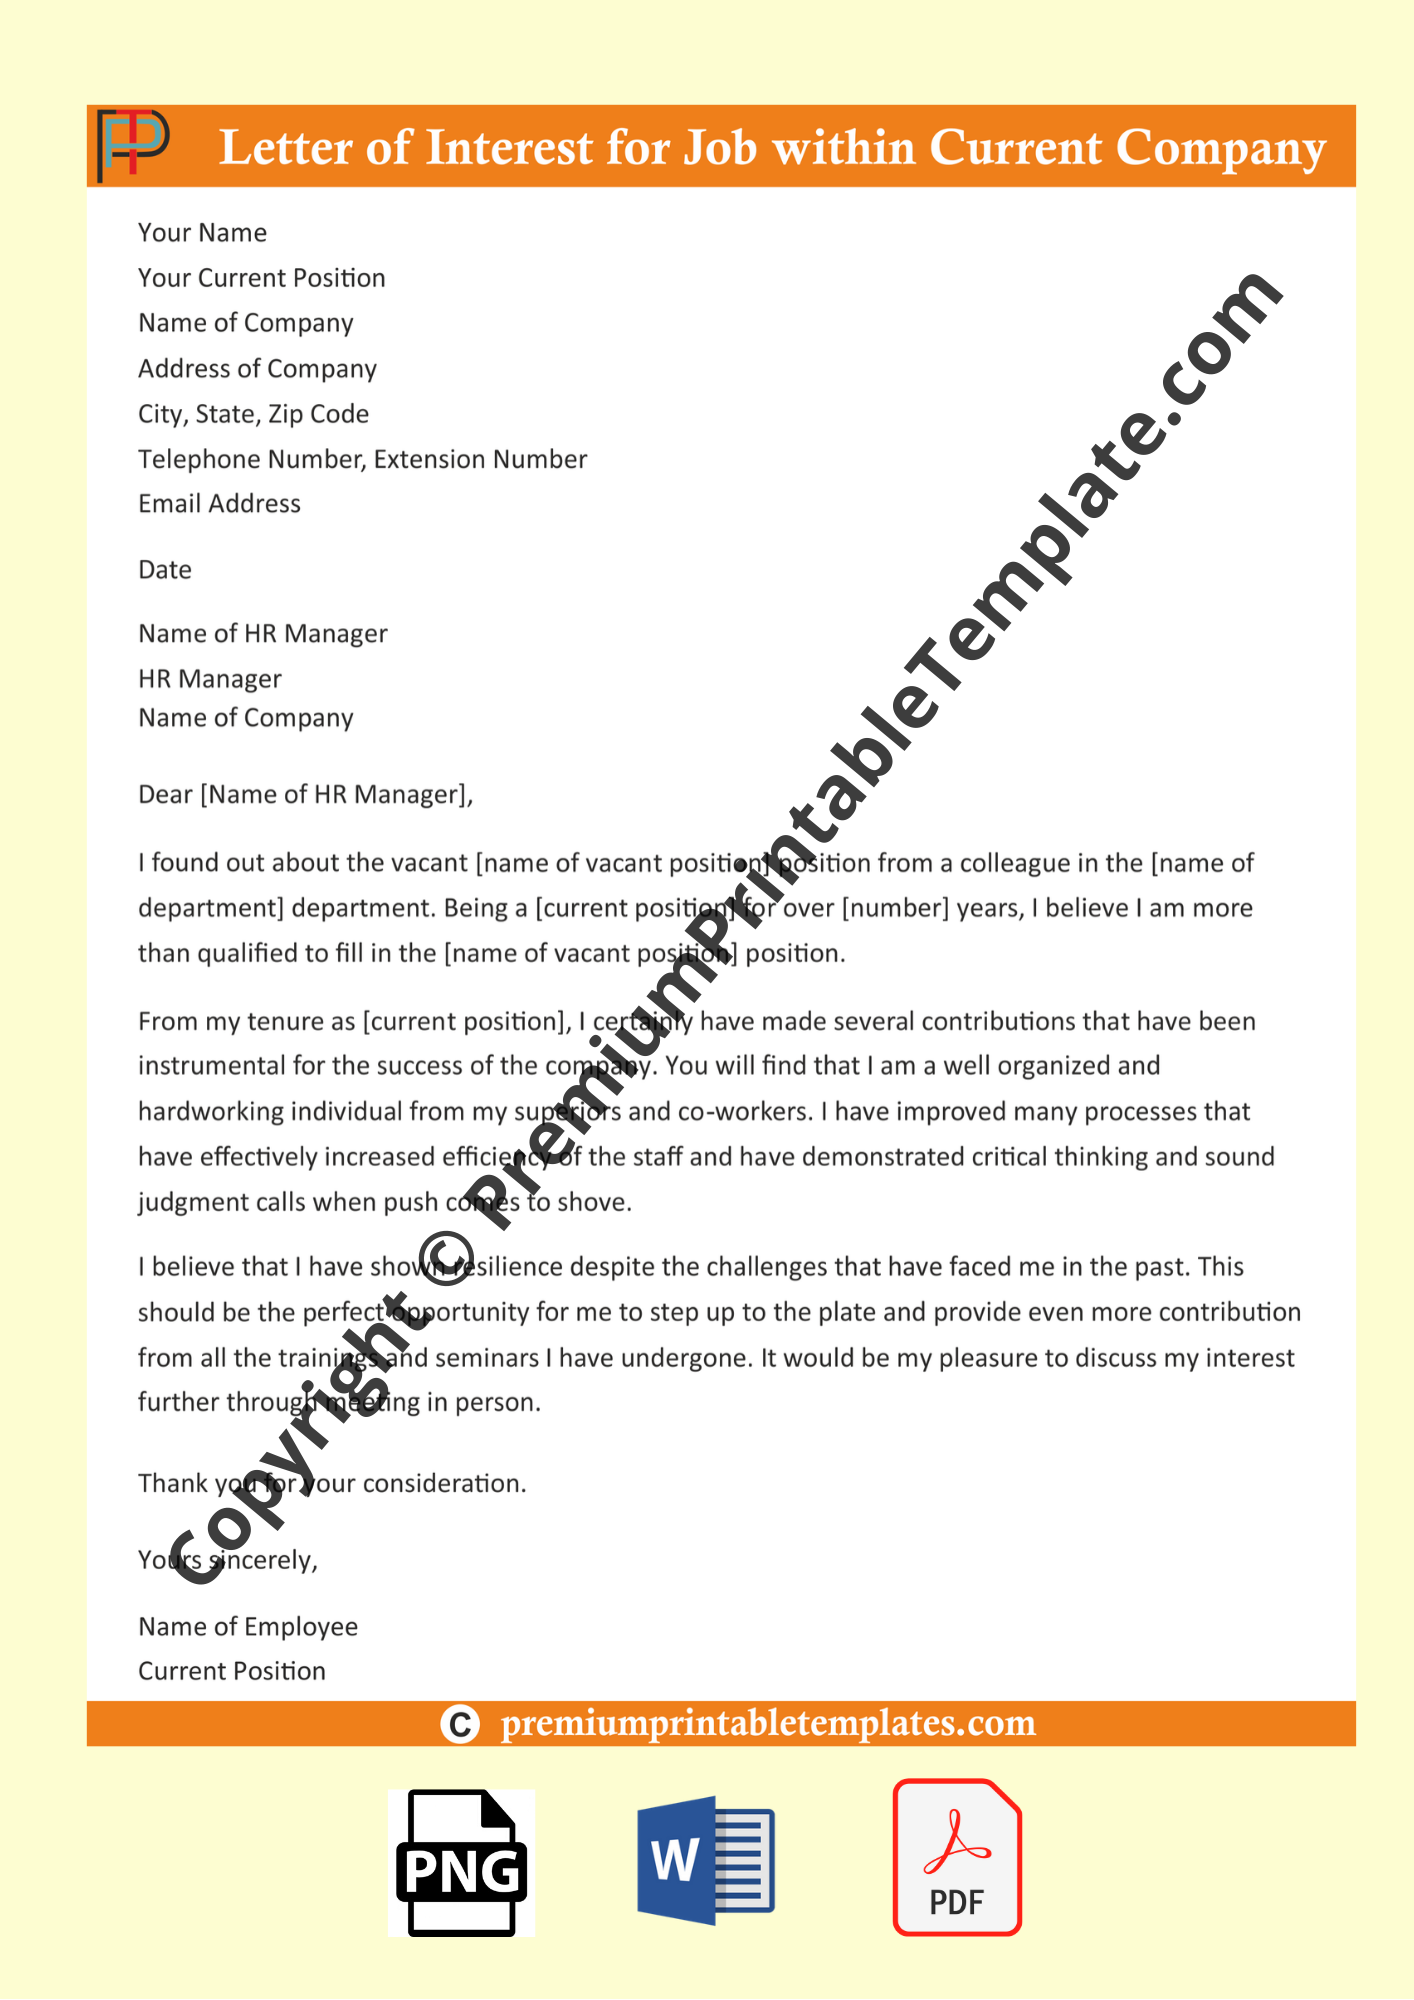 Sample Letter Of Interest For A Job Within The Same Company from premiumprintabletemplates.com